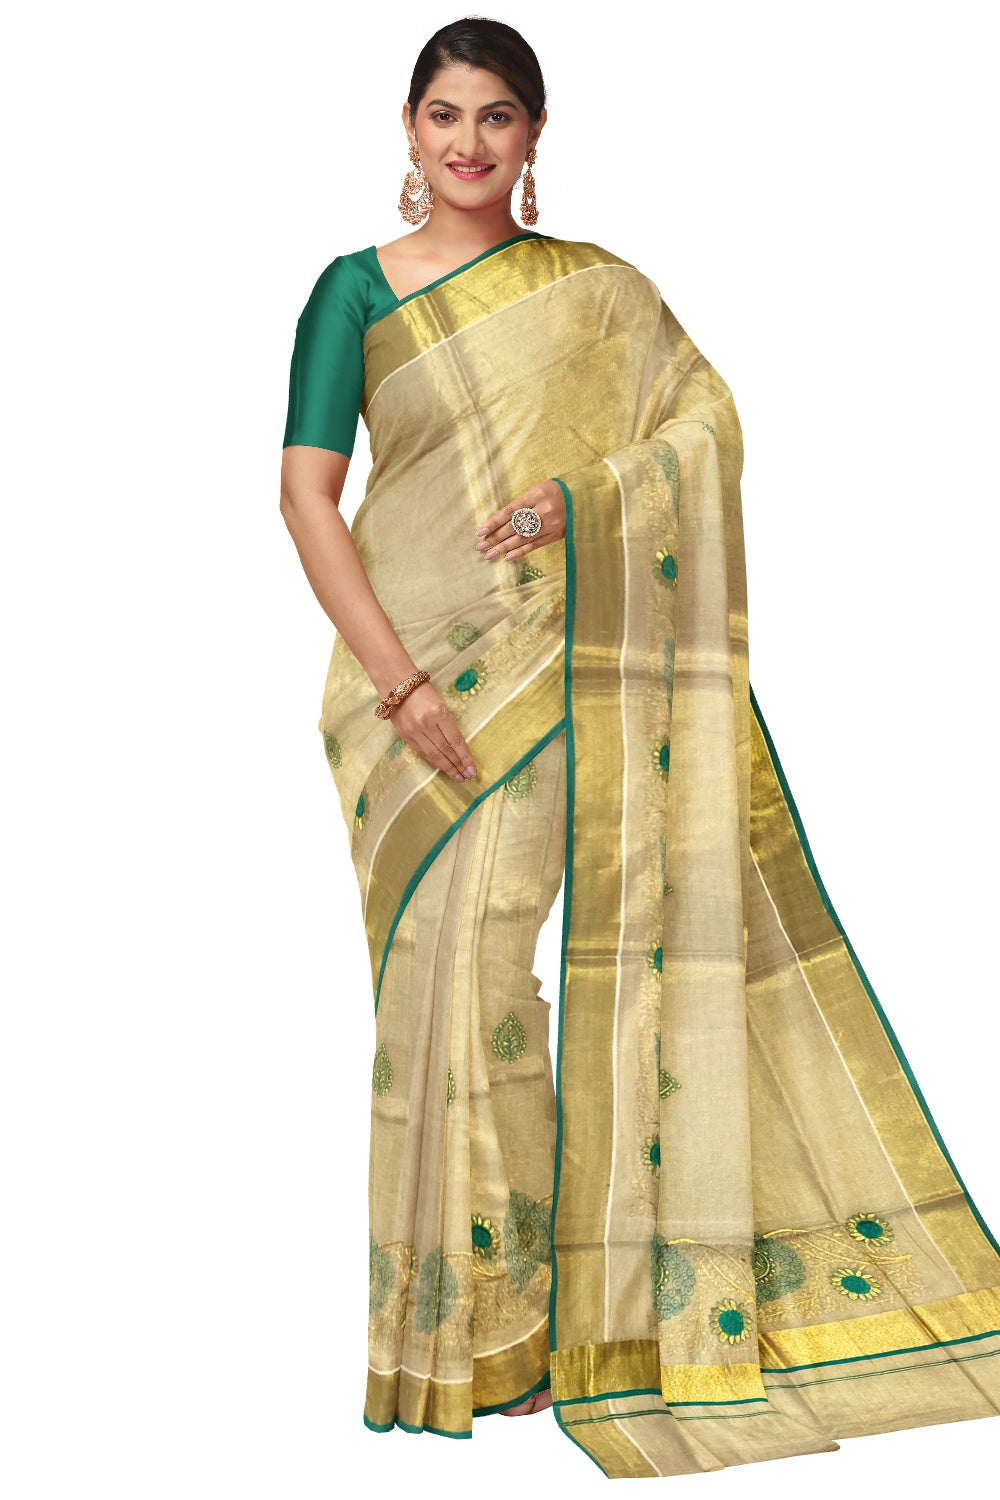 Kerala Tissue Kasavu Heavy Work Saree with Golden and Turquoise Feather Embroidery Design